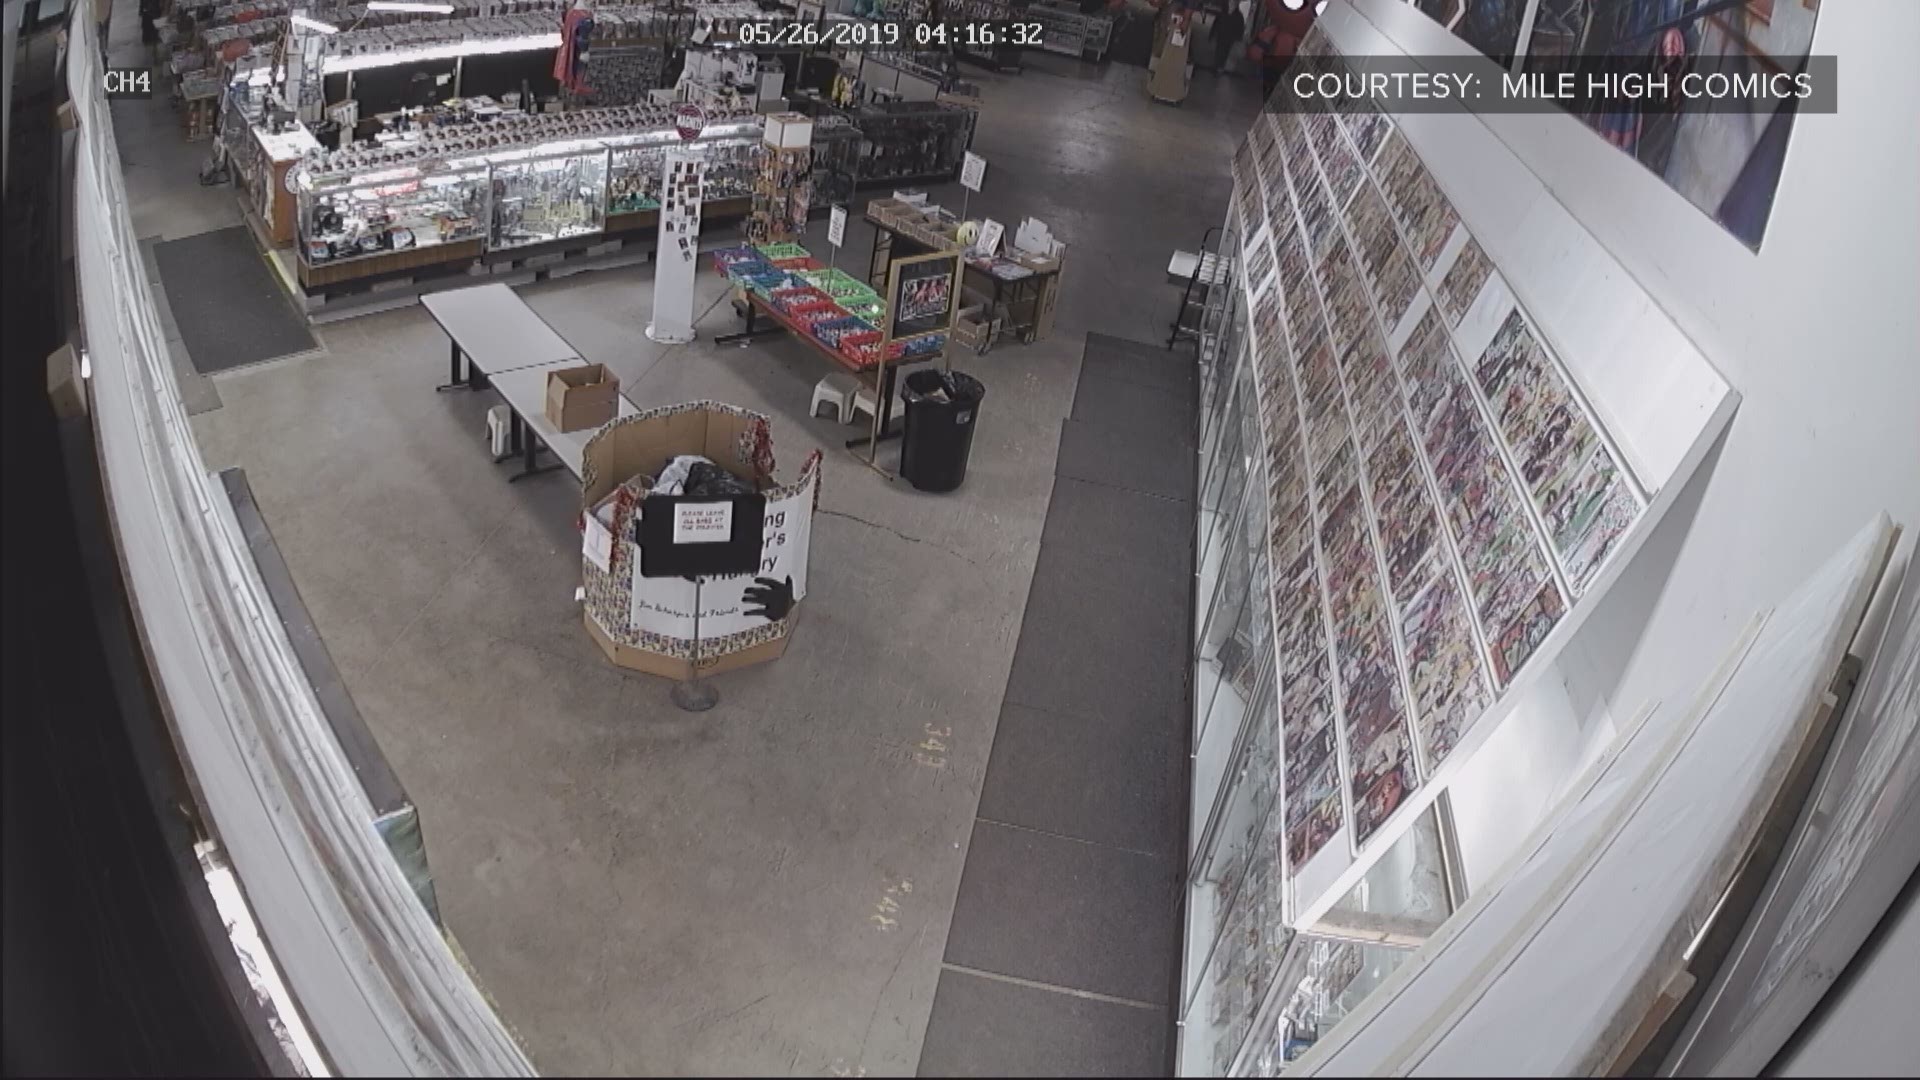 A thief is seen at Mile High Comics using some kind of metal object to break the glass, then removing books one at a time. At some point it appears he cuts himself on the arm or hand, then retrieves cleaning supplies from inside the store and begins cleaning up the blood and mess.